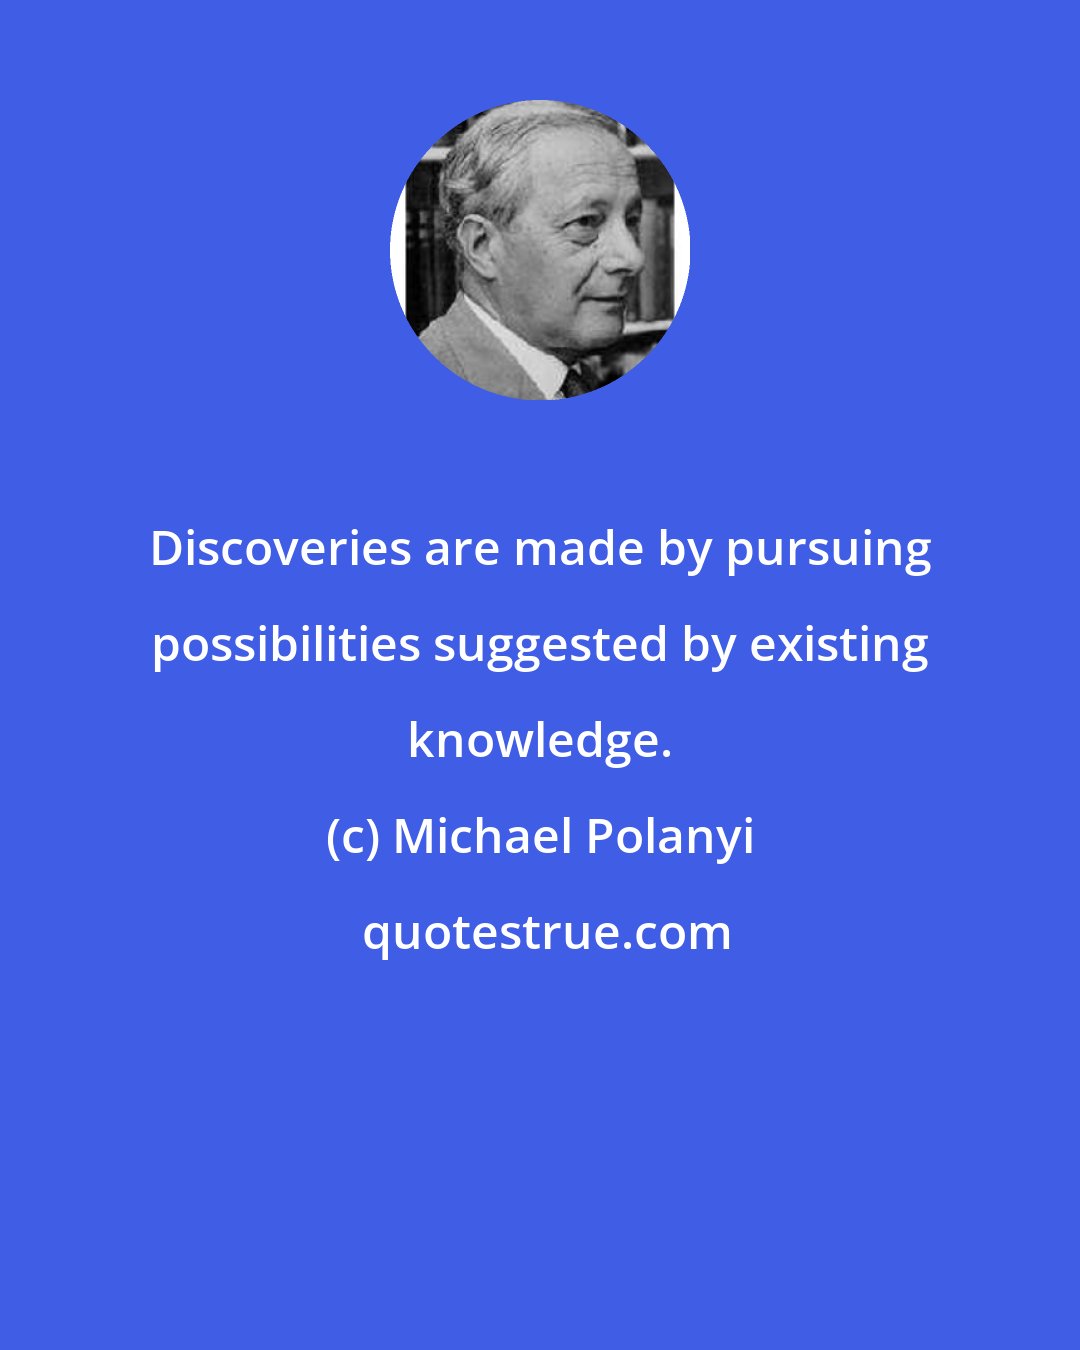 Michael Polanyi: Discoveries are made by pursuing possibilities suggested by existing knowledge.